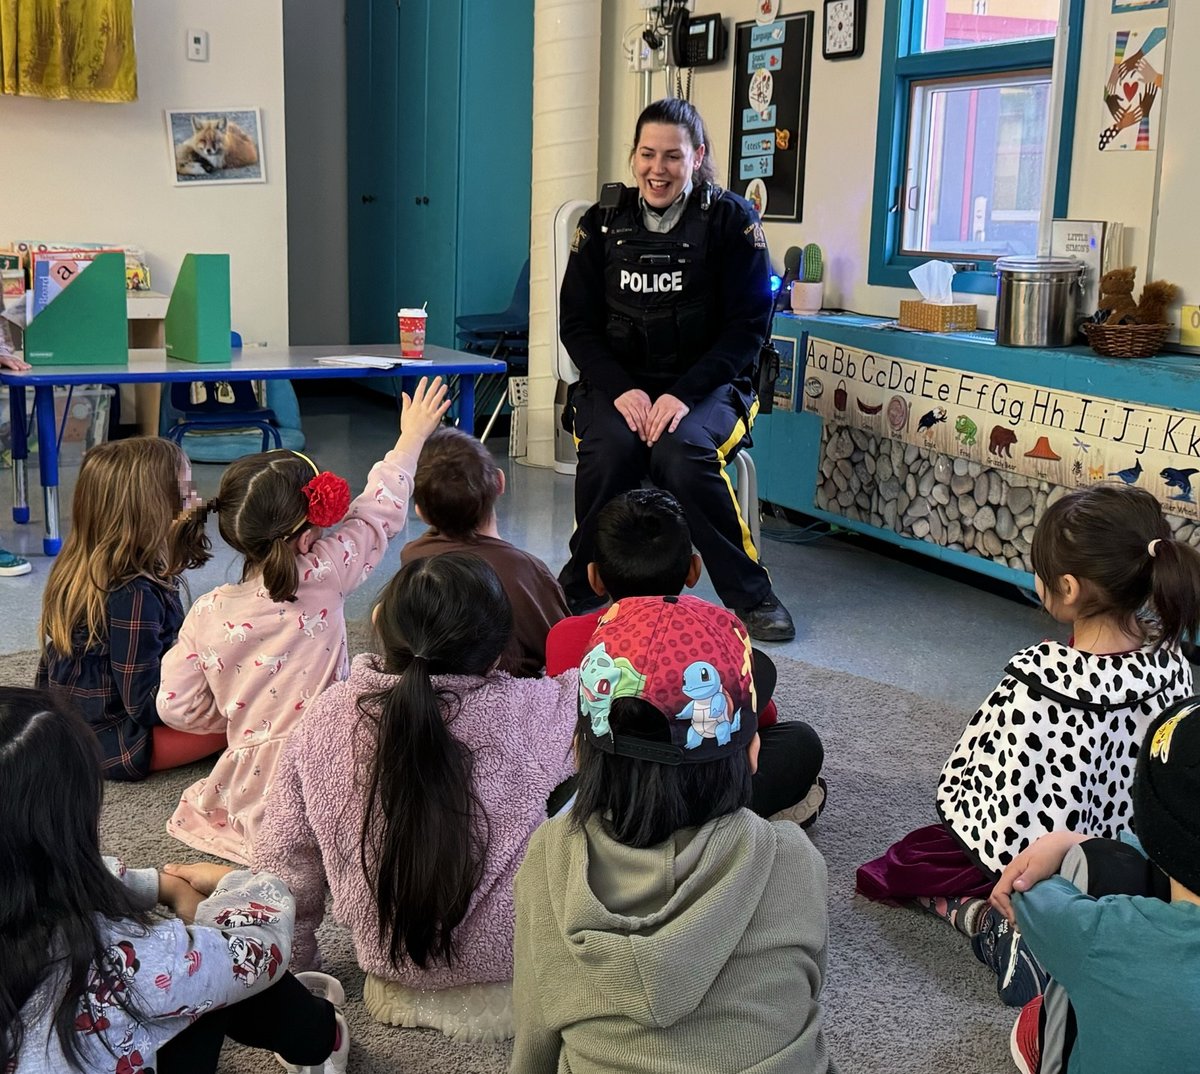 The Whitehorse RCMP community policing unit was busy visiting elementary schools in the two weeks leading up to March Break. . ow.ly/2Z3v50QYjnu